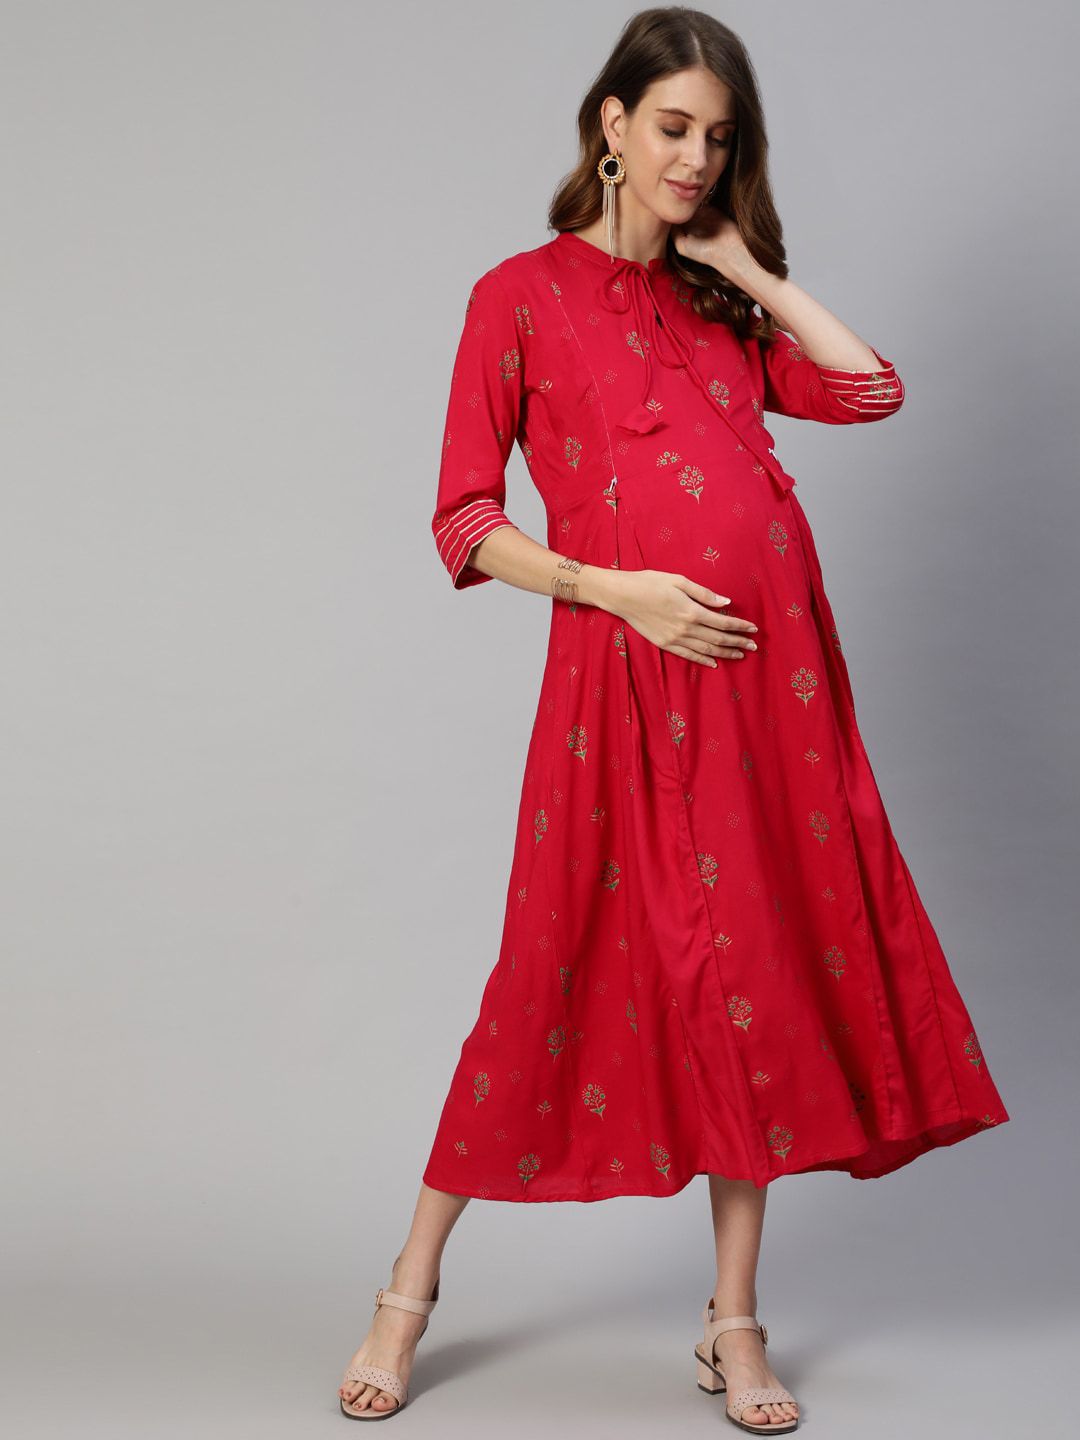 Anubhutee Red Floral Maternity A-Line Midi Dress Price in India